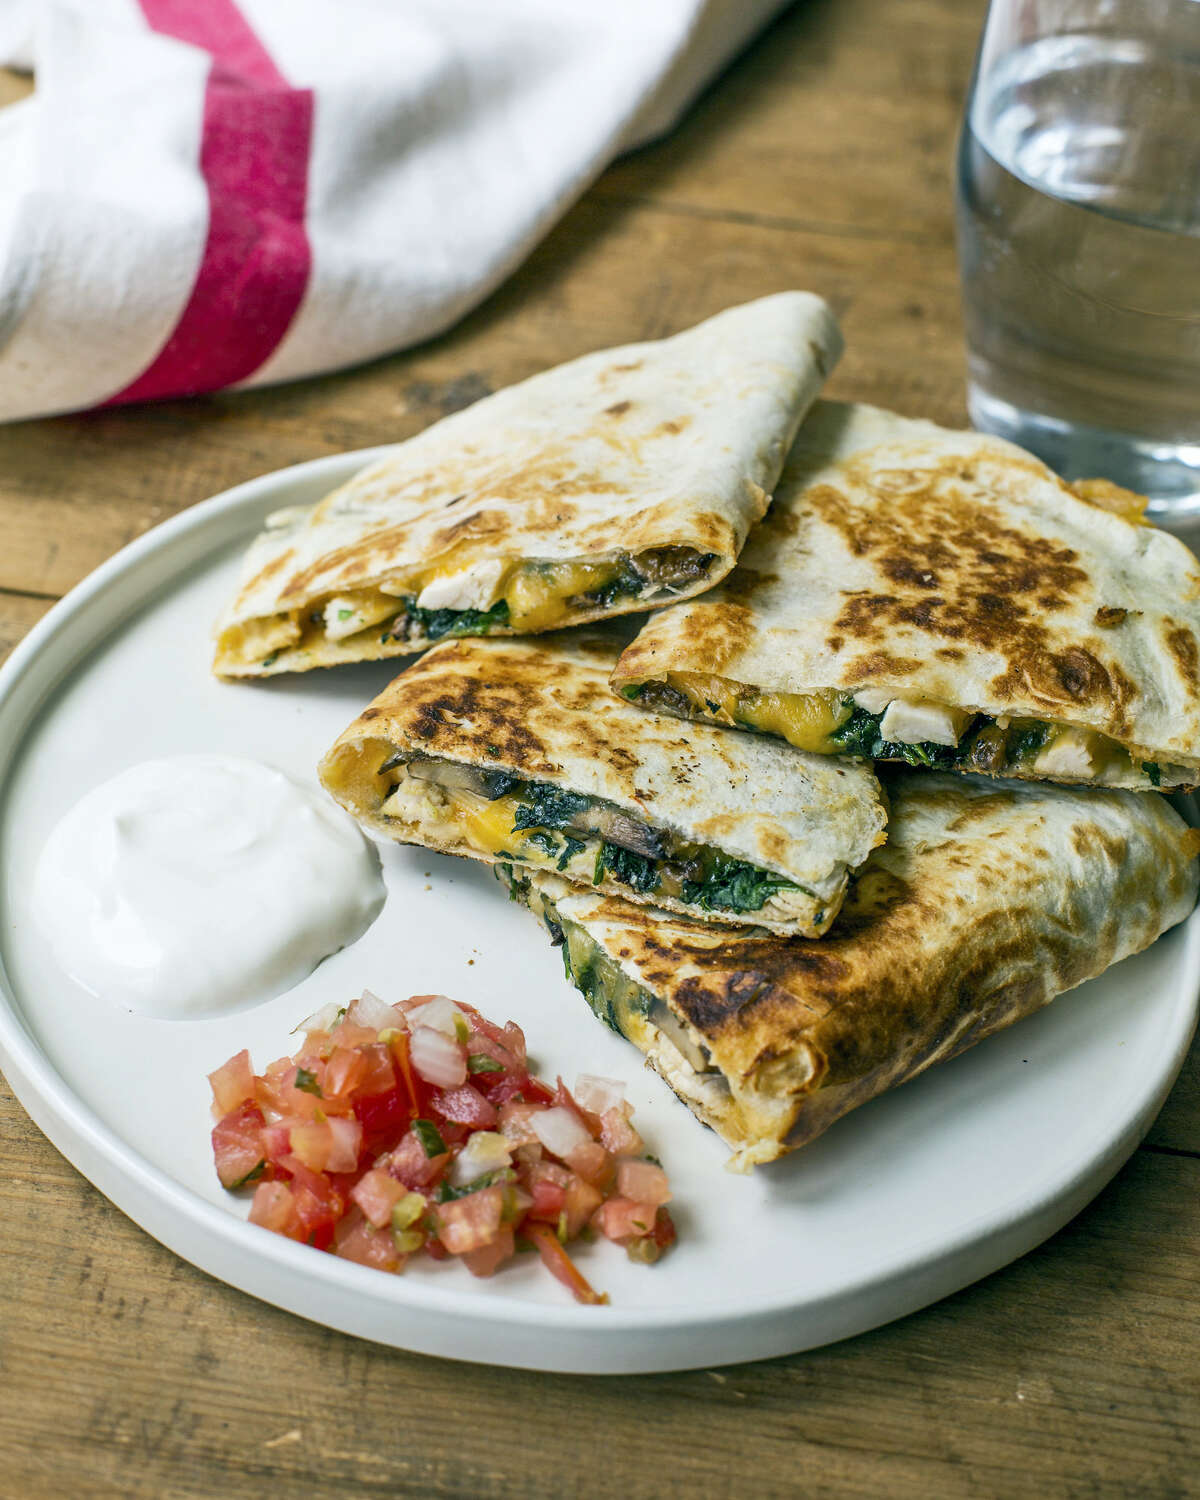 Spinach, mushroom and chicken quesadillas are a great idea for the pre-trick-or-treat rush.